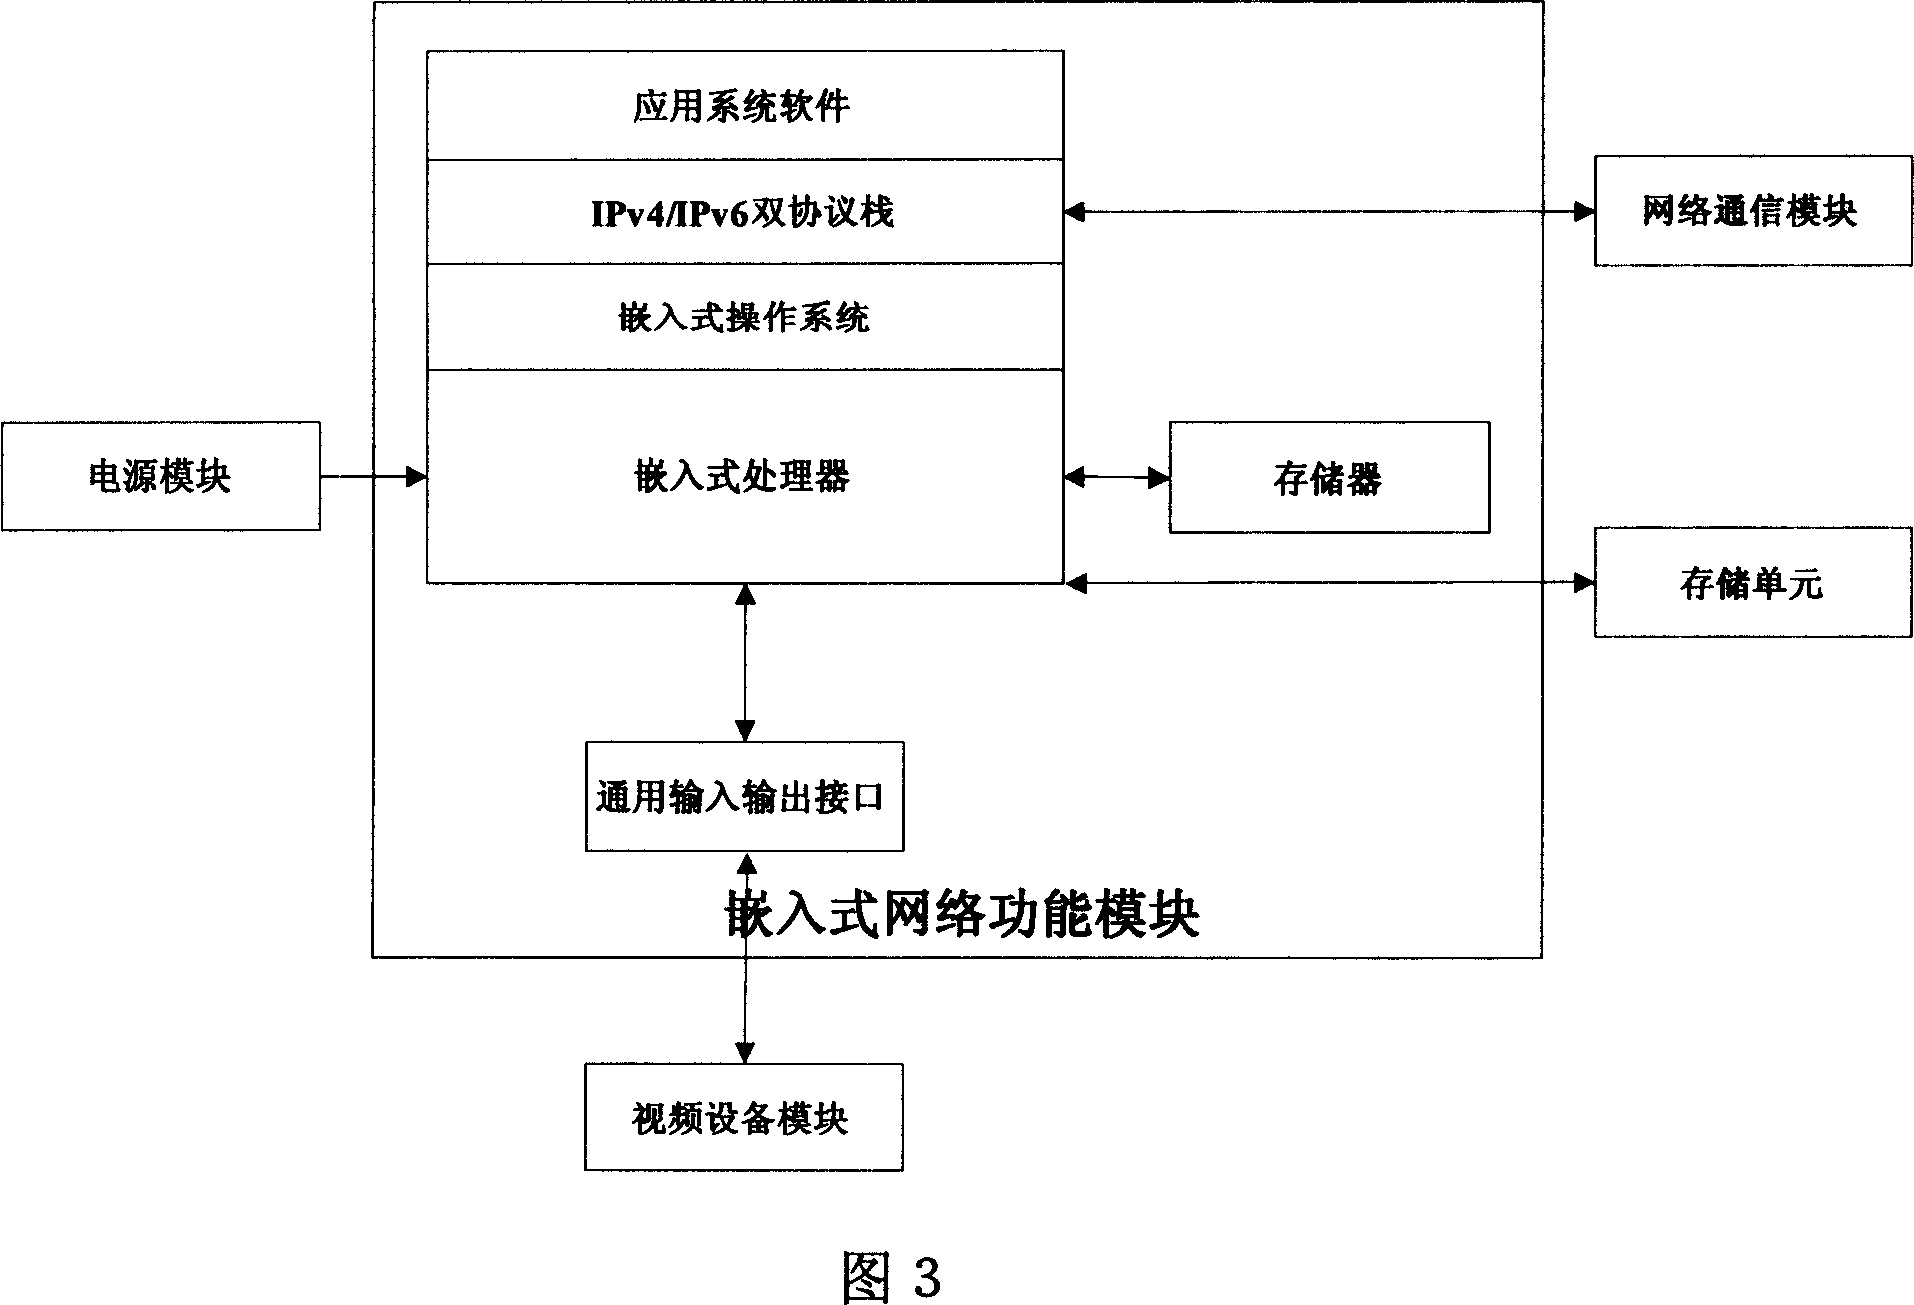 IPv6 remote monitoring device and method